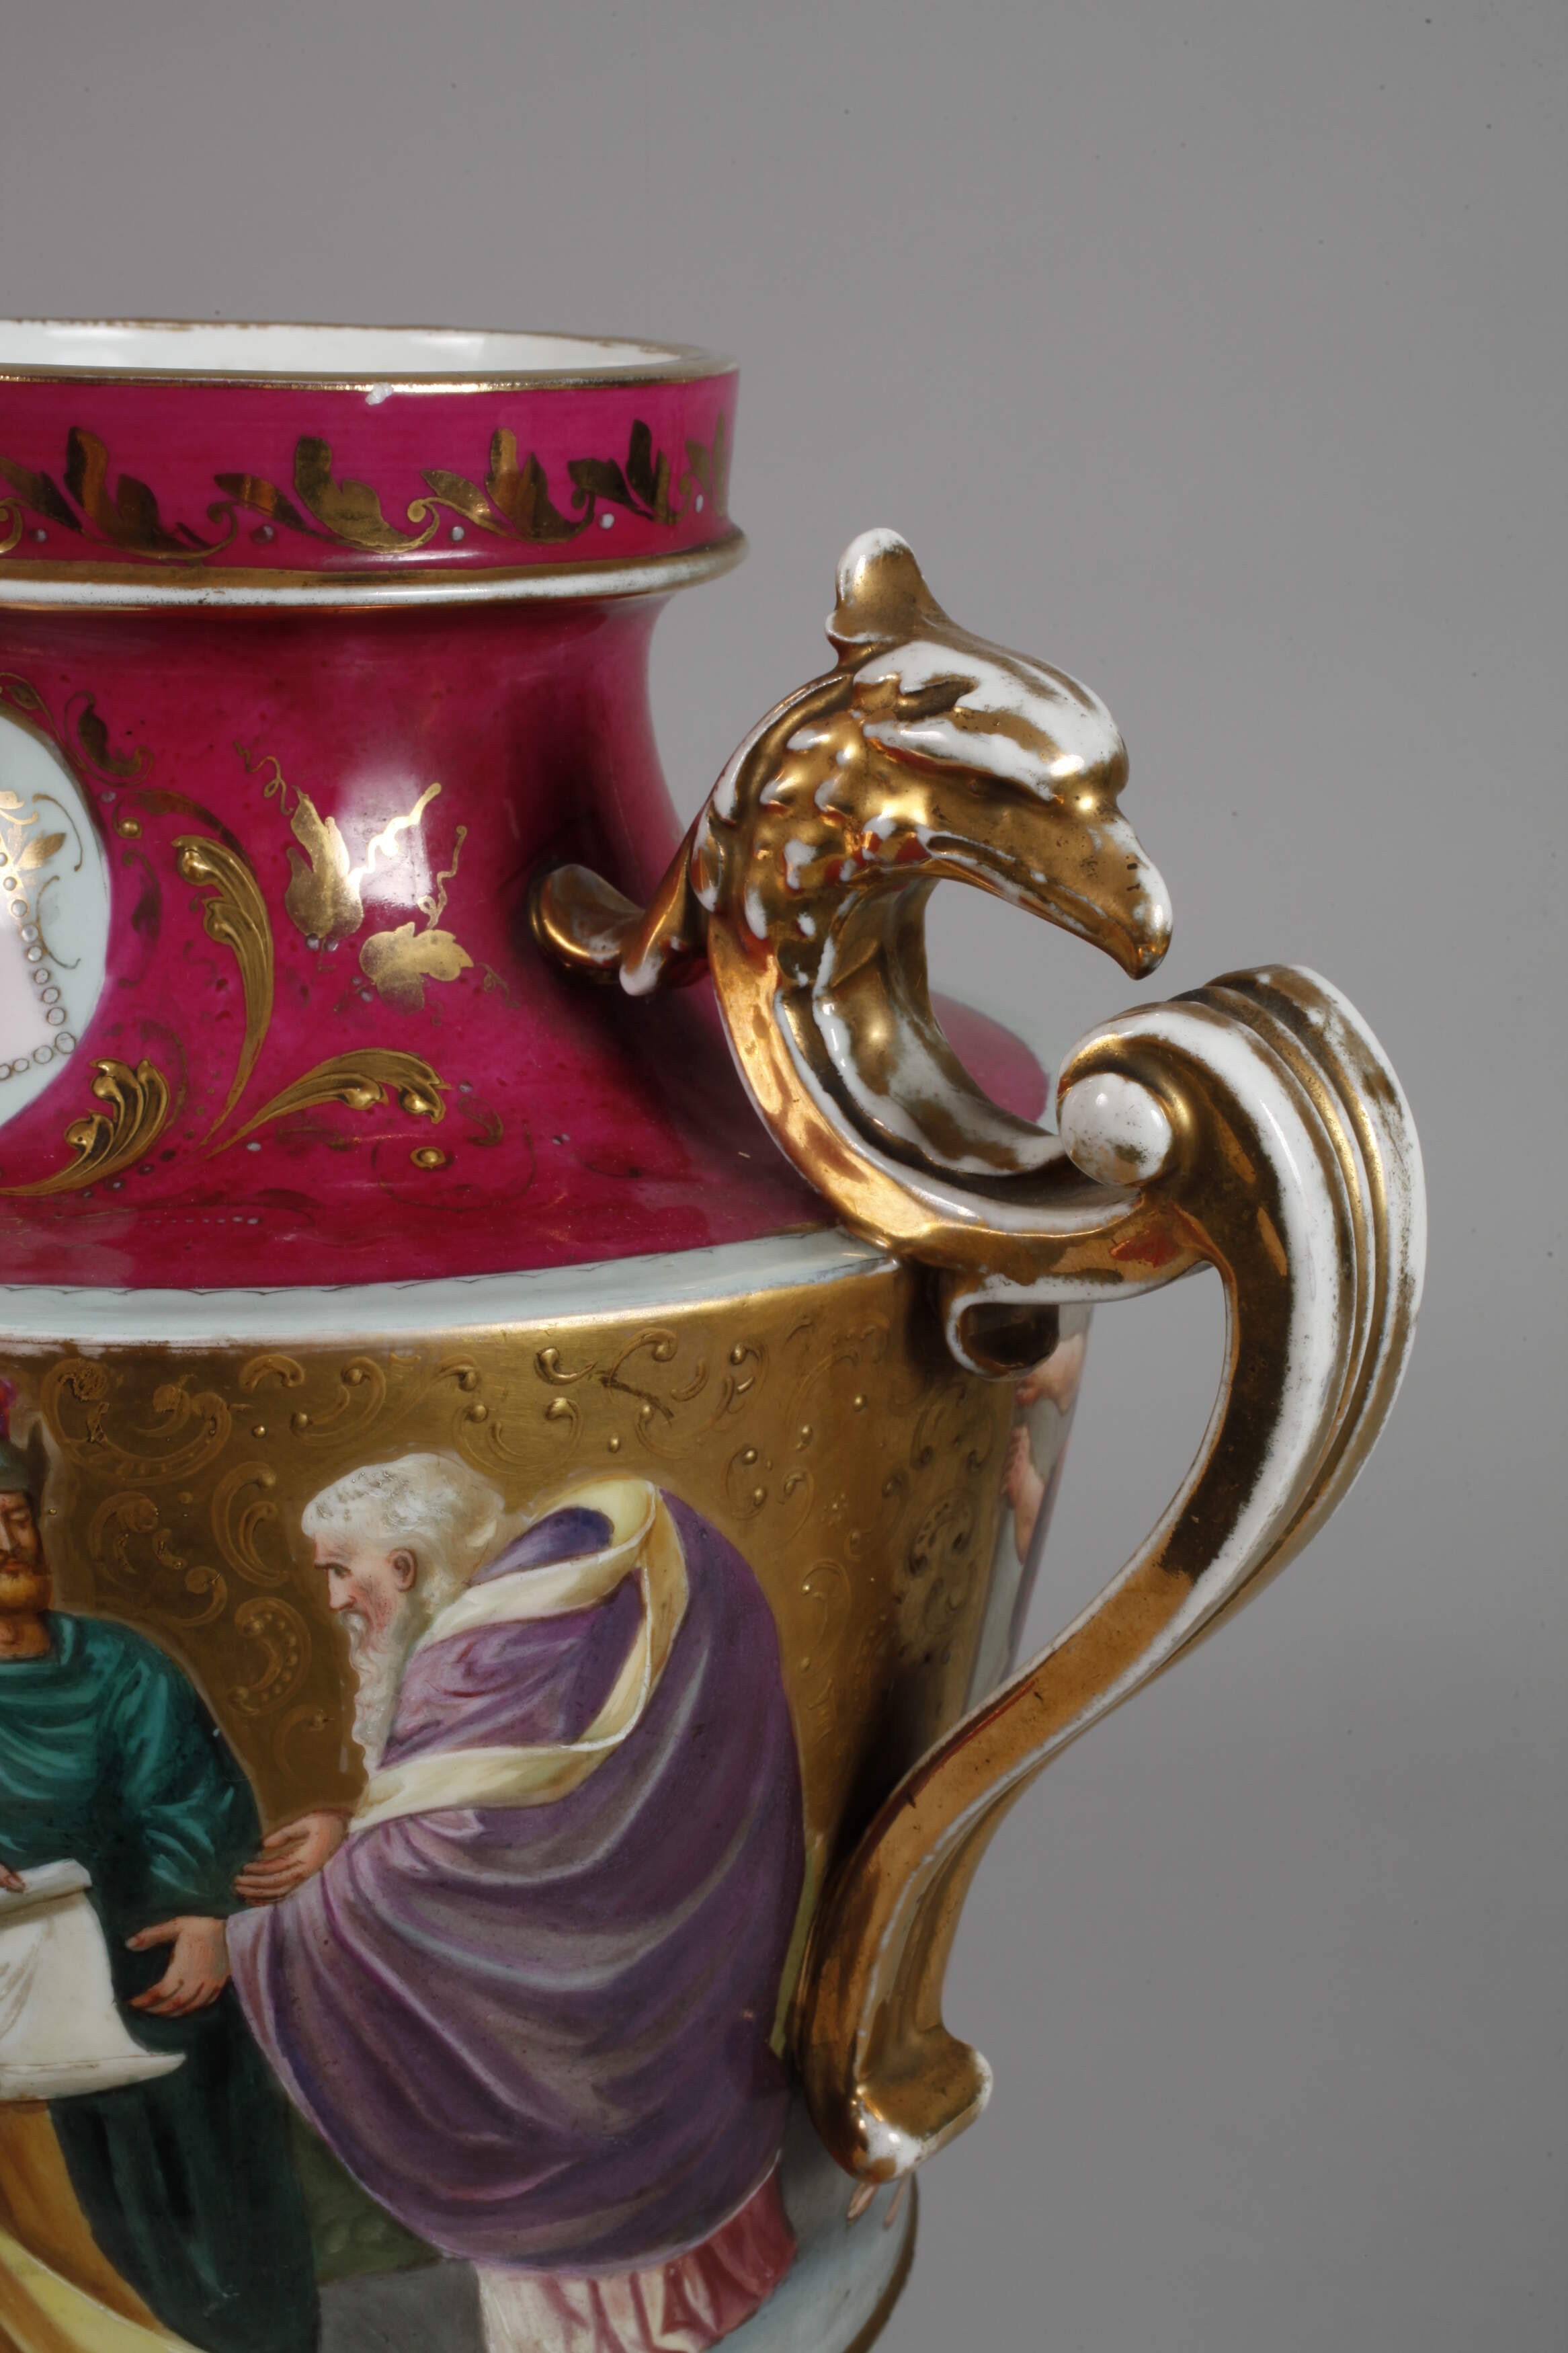 Bohemian ceremonial vase with pedestal in the old Viennese style - Image 9 of 9